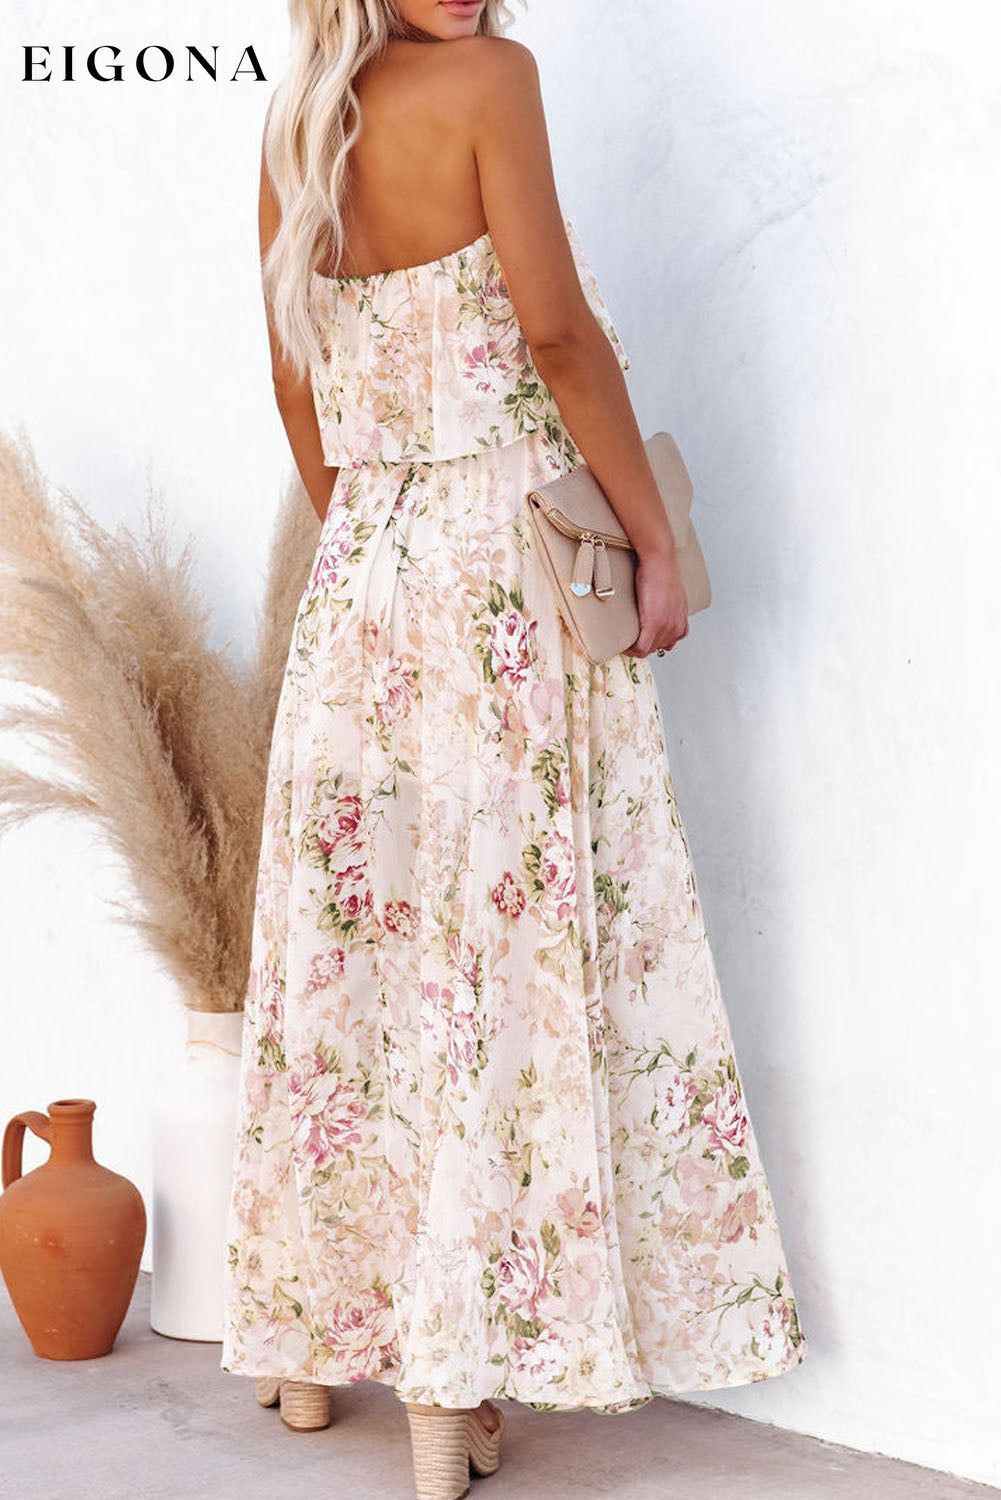 Pink Floral Print Strapless Tube Top Maxi Dress casual dress casual dresses clothes Detail Ruffle dress dresses maxi dress Occasion Vacation Print Floral Season Summer Size S To 2XL Sleeve Sleeveless Style Bohemian Style Elegant